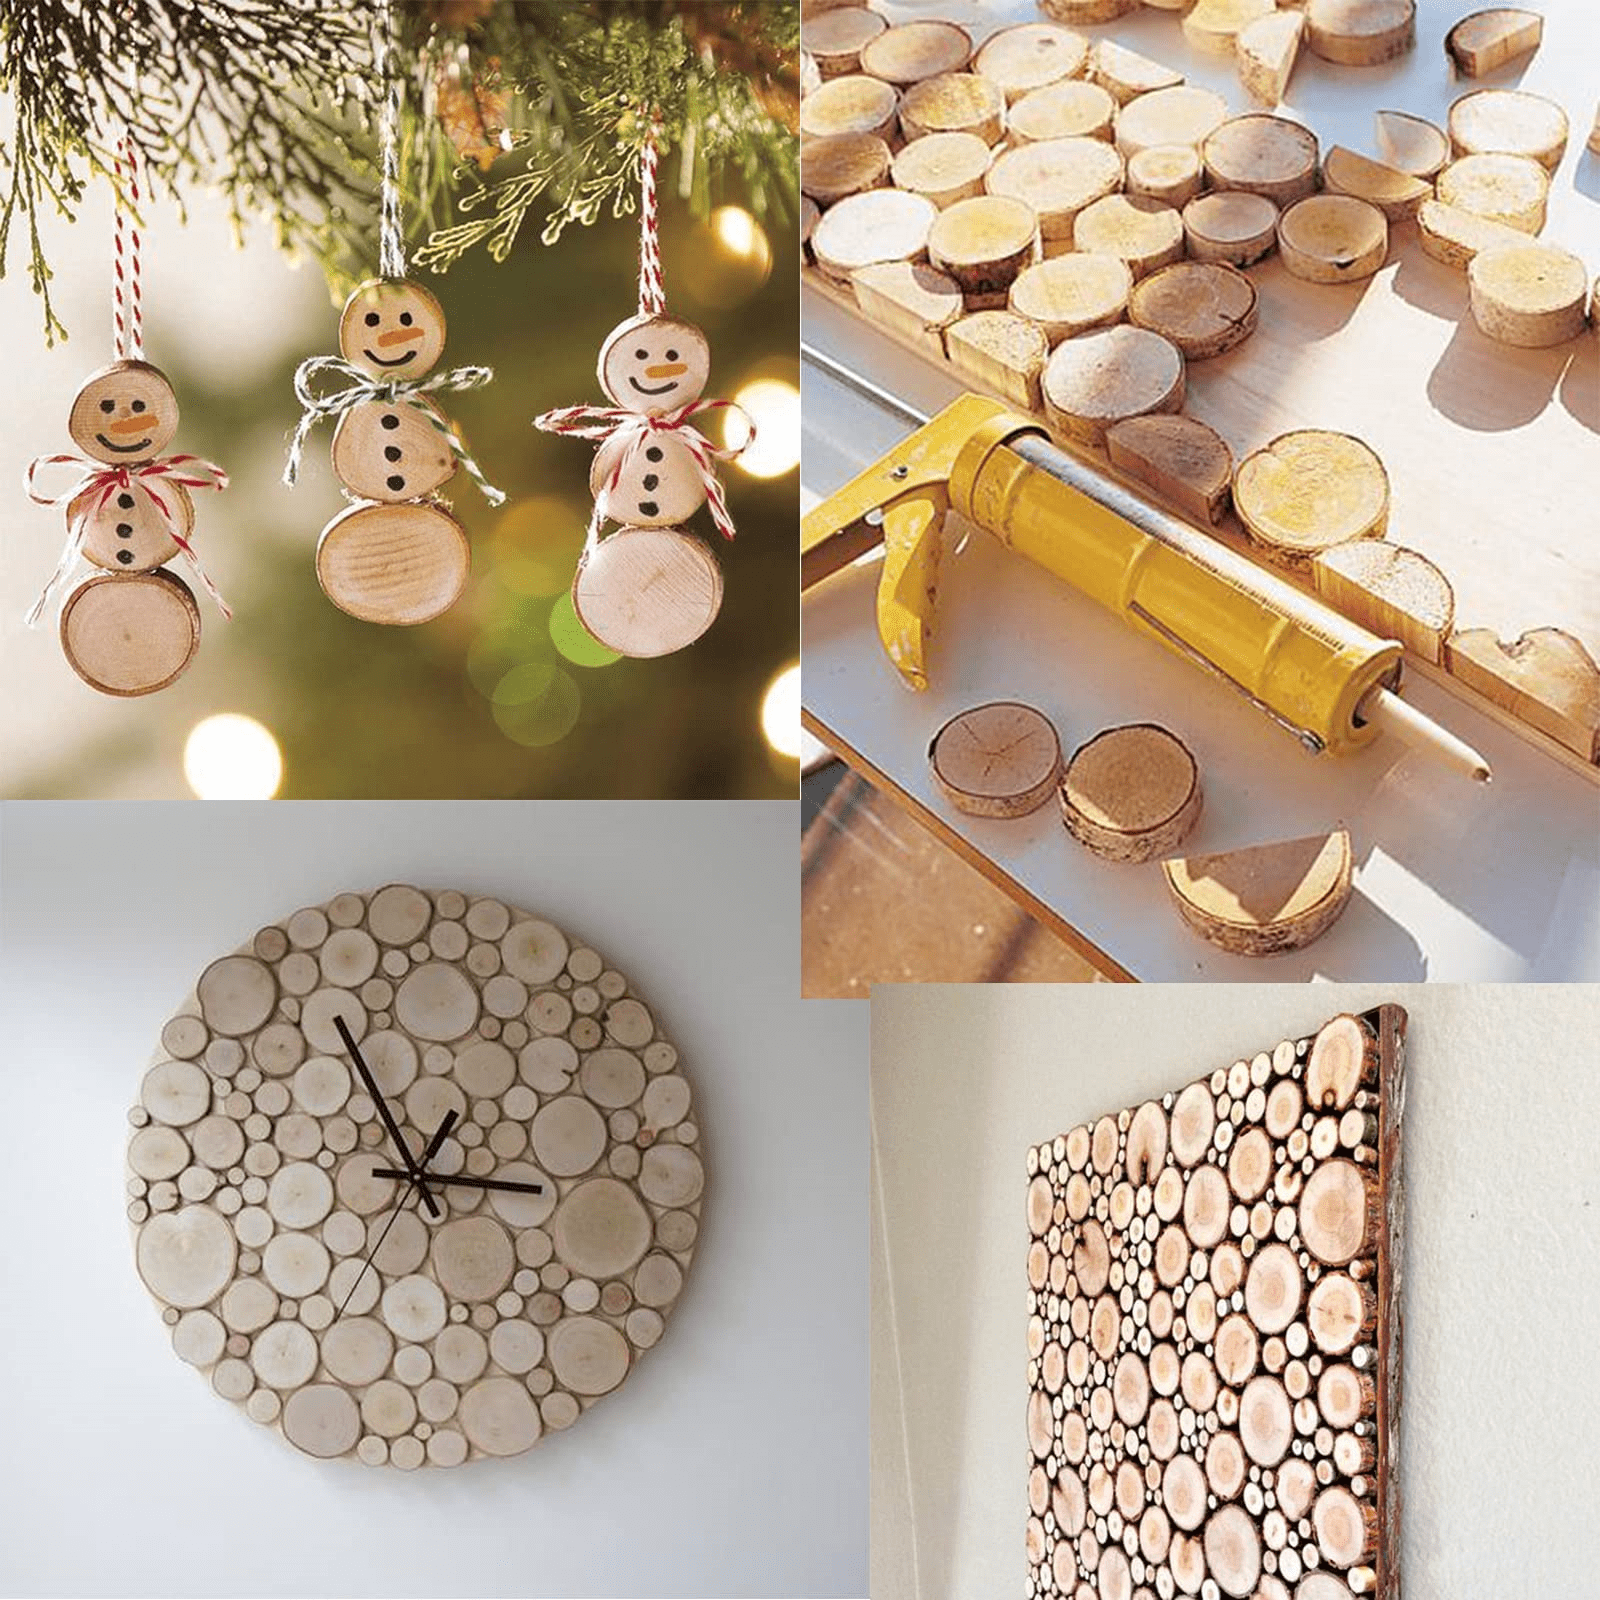 Unfinished Natural Wooden Slices 80 Pcs 3.2-4 Inch Wood Circles for Crafts  DIY Christmas Ornament Craft Wood Kit with Bit,Blank Round Wood Slice with